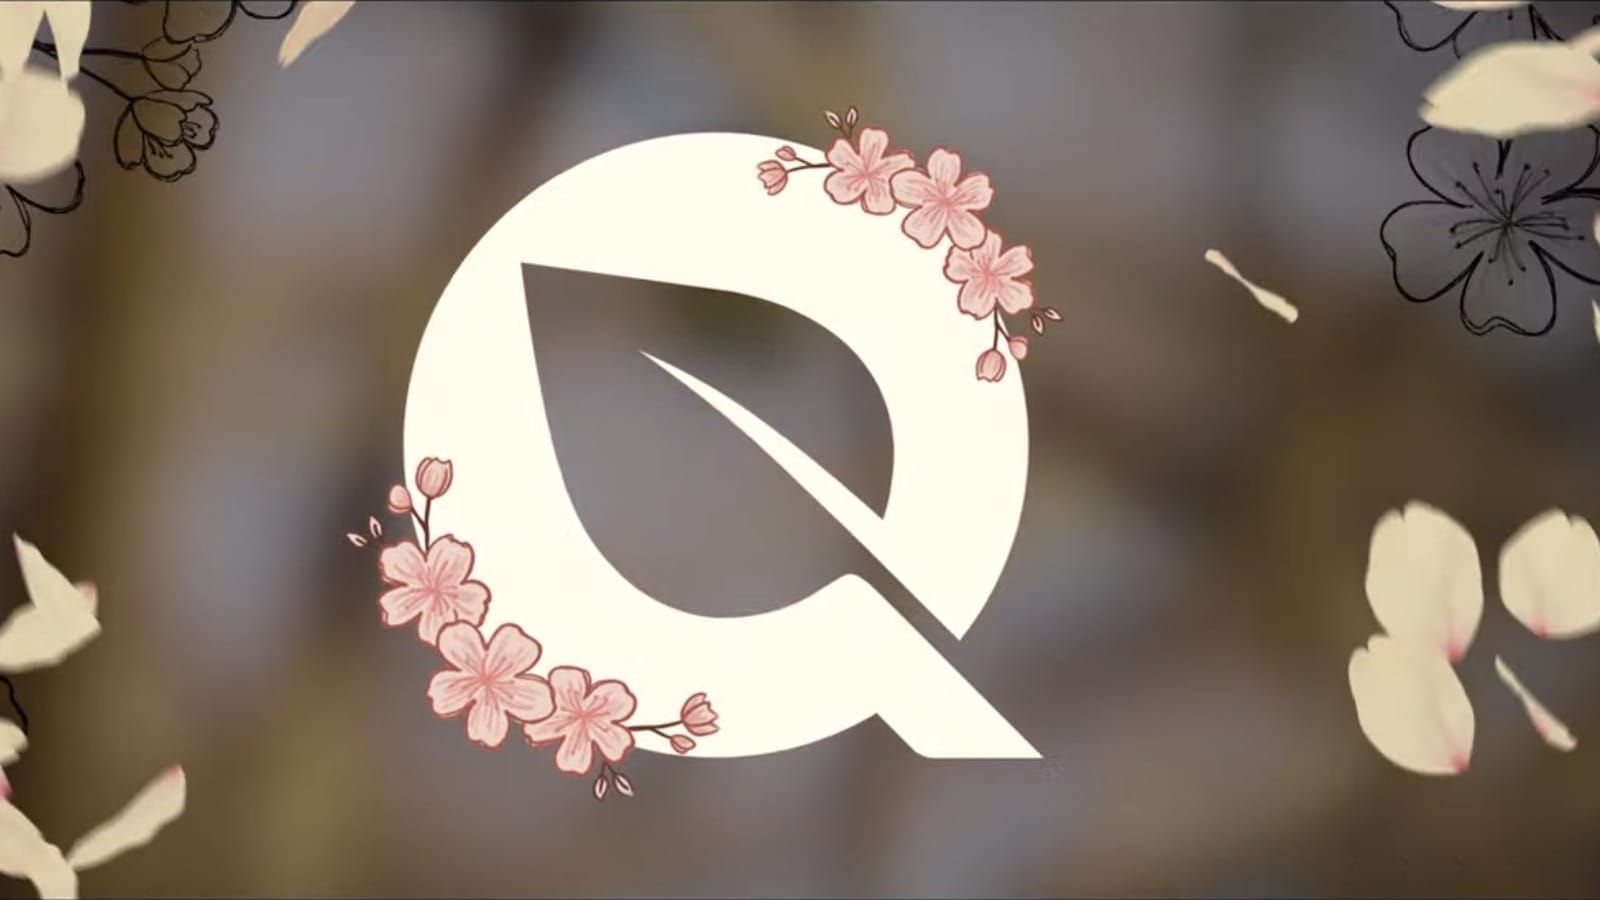 FlyQuest 2022 spring logo design with a big letter "Q" surrounding a leaf and cherry blossoms arounf the Q